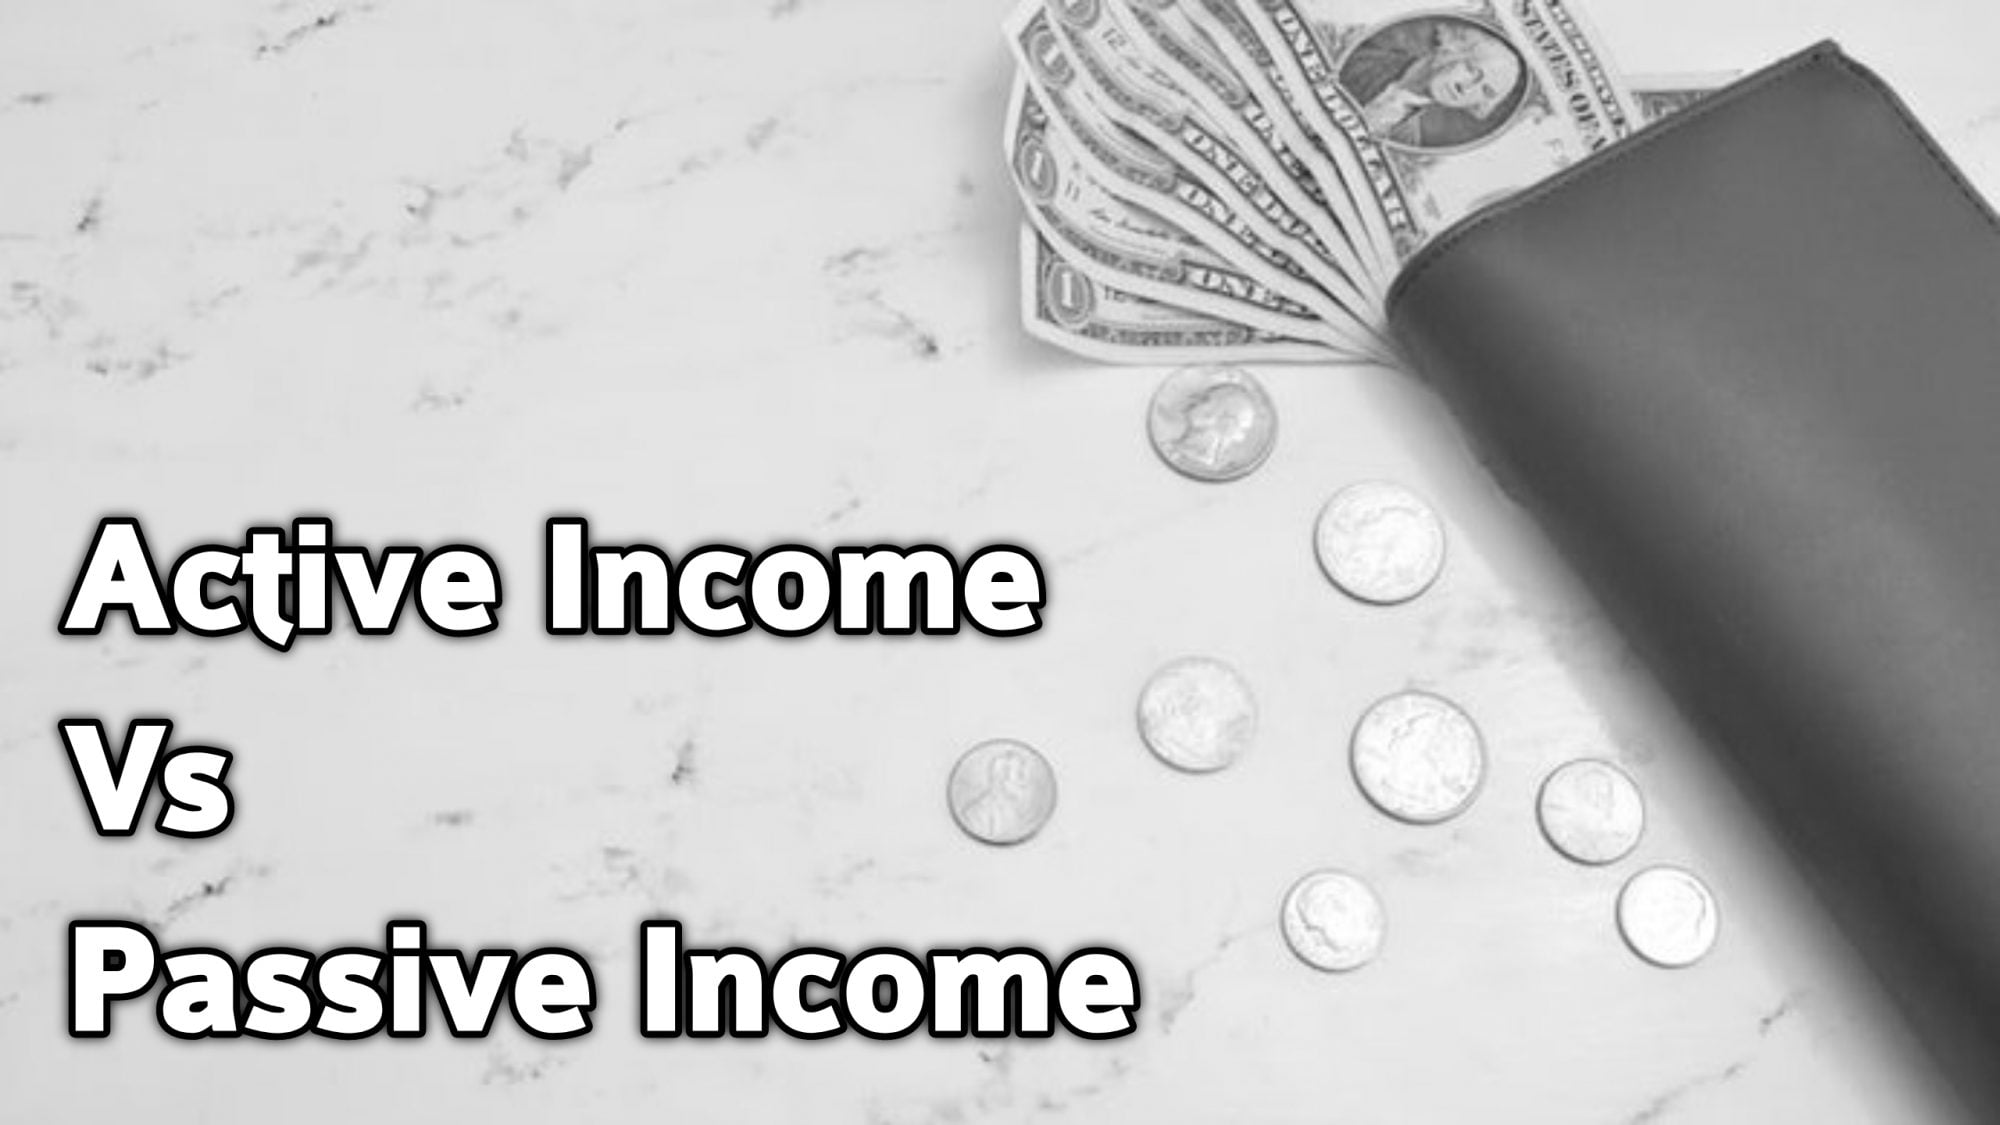 meaning and Differences Between active and passive income